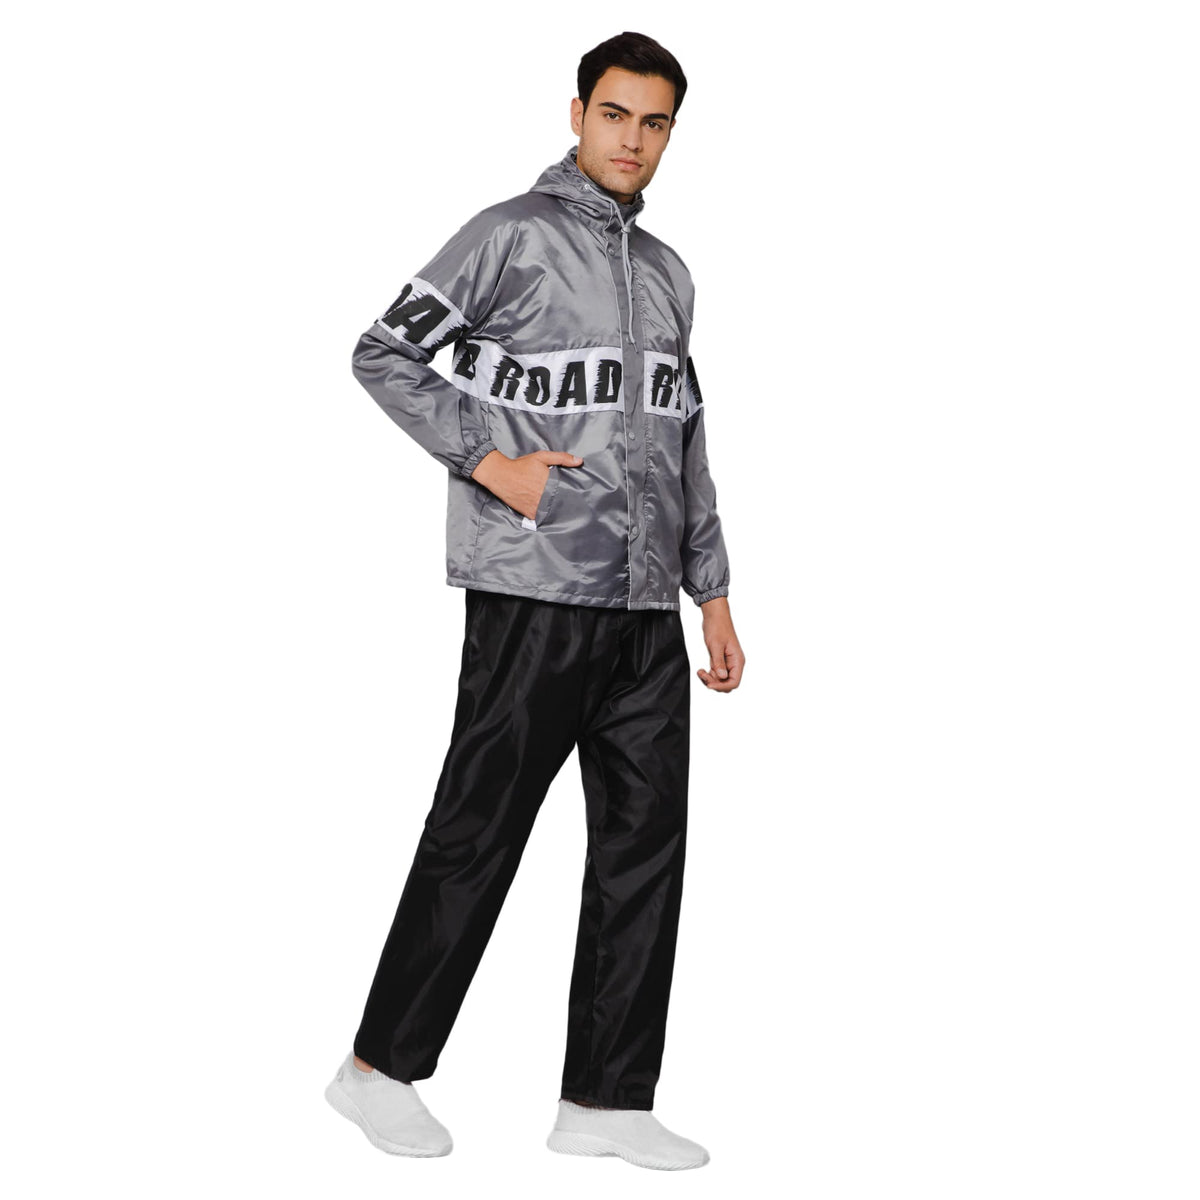 The Clownfish by STRAUSS Road Rider Men's Waterproof Raincoat Polyester Double Coating Reversible Rain Suit with Hood & Inner Mobile Pocket. Set of Top and Bottom. Printed Pouch (Grey, XXX-Large)